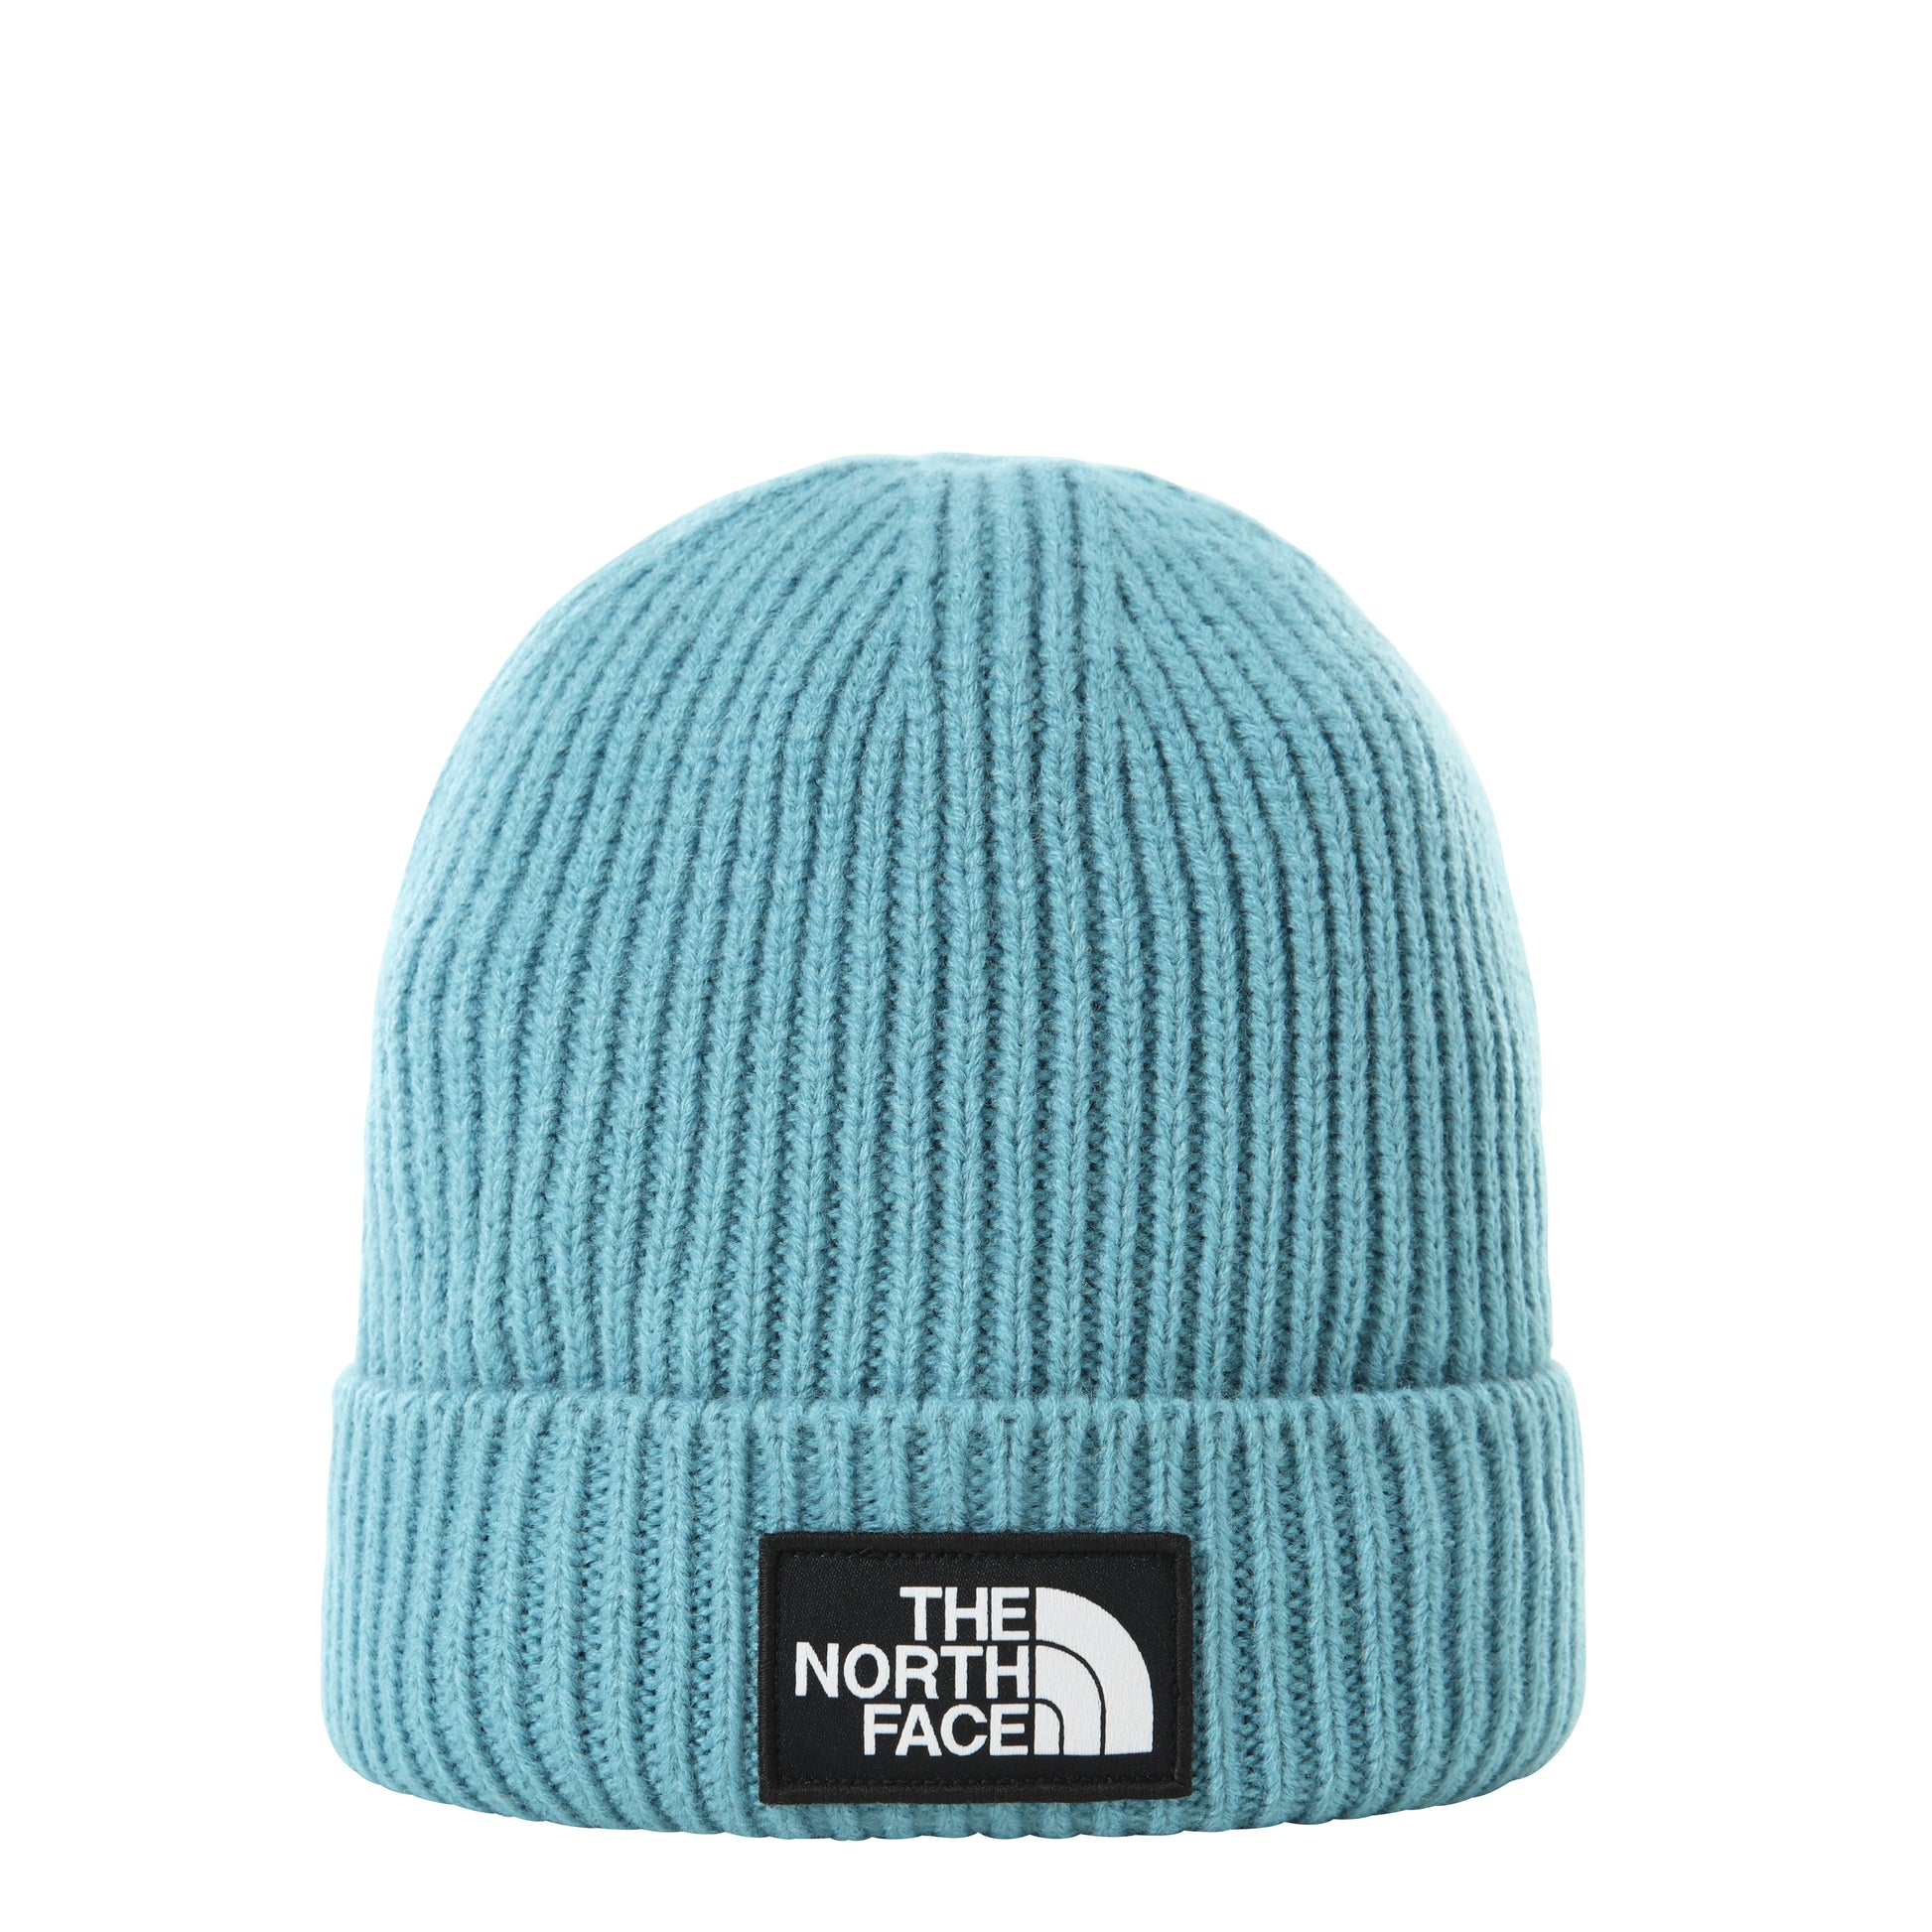 THE NORTH FACE LOGO CUFFED BNIE STORM - BLUE freeshipping - FREESTYLE LLORET